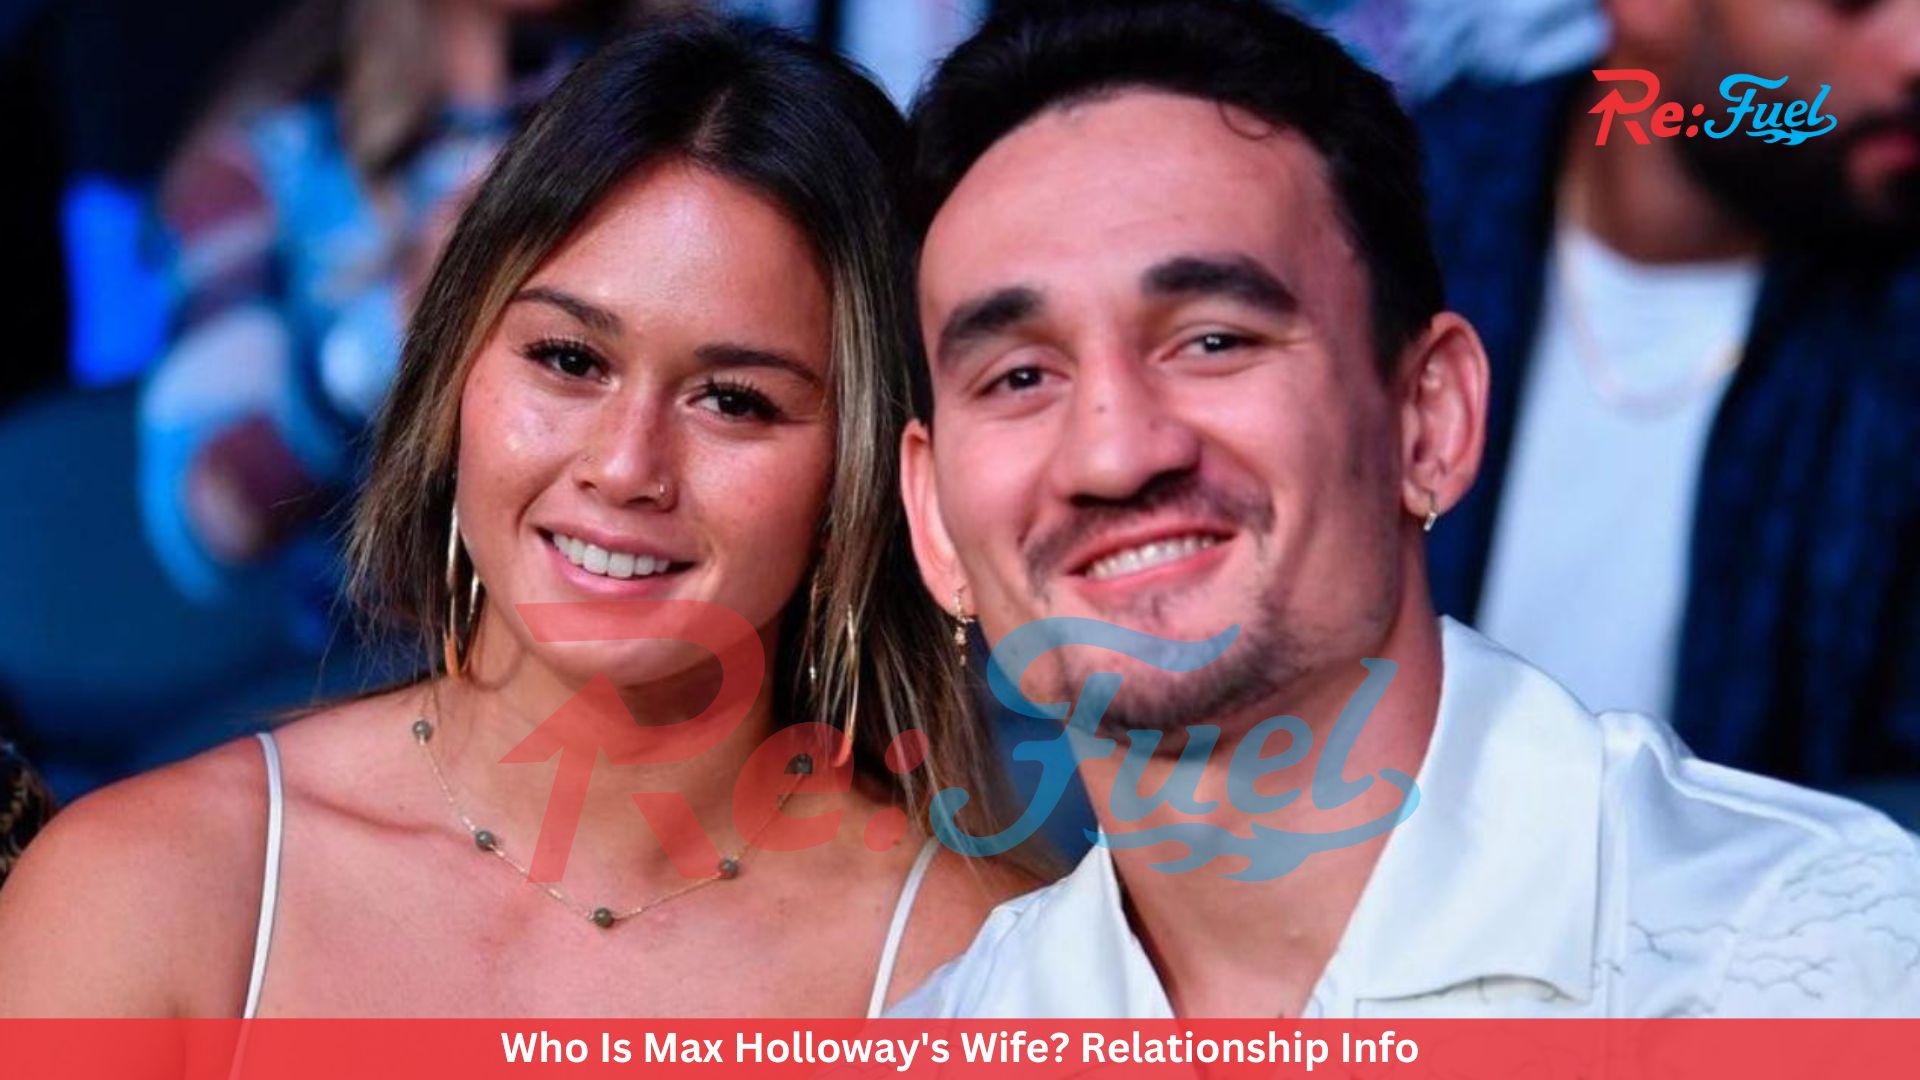 Who Is Max Holloway's Wife? Relationship Info